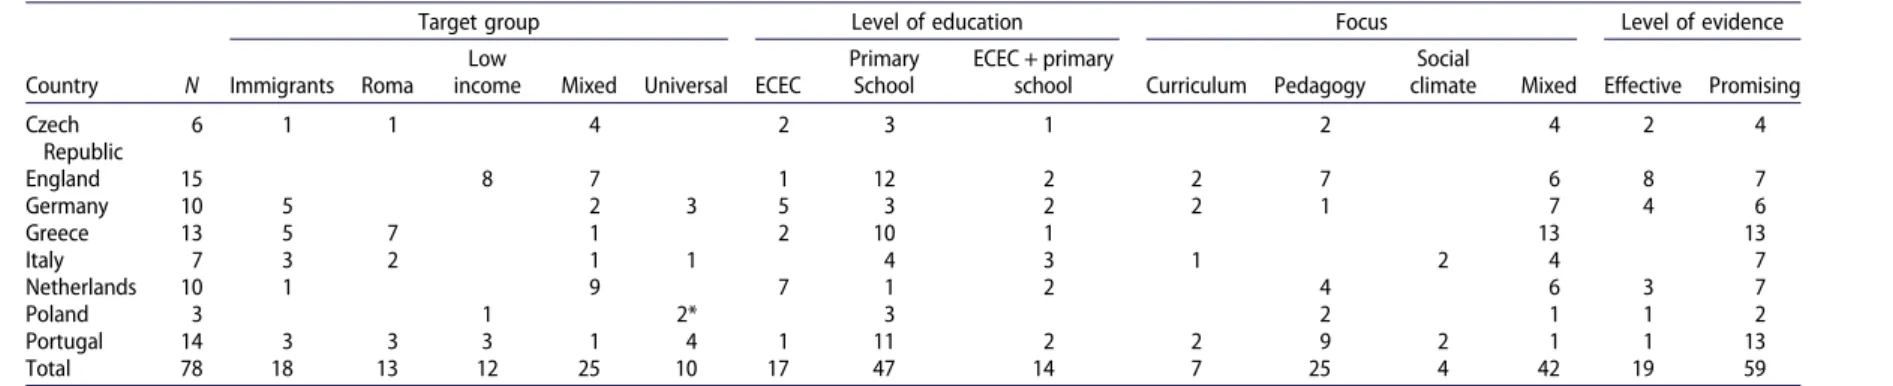 Table 4. Frequencies for target group, level of education, focus, and level of evidence.